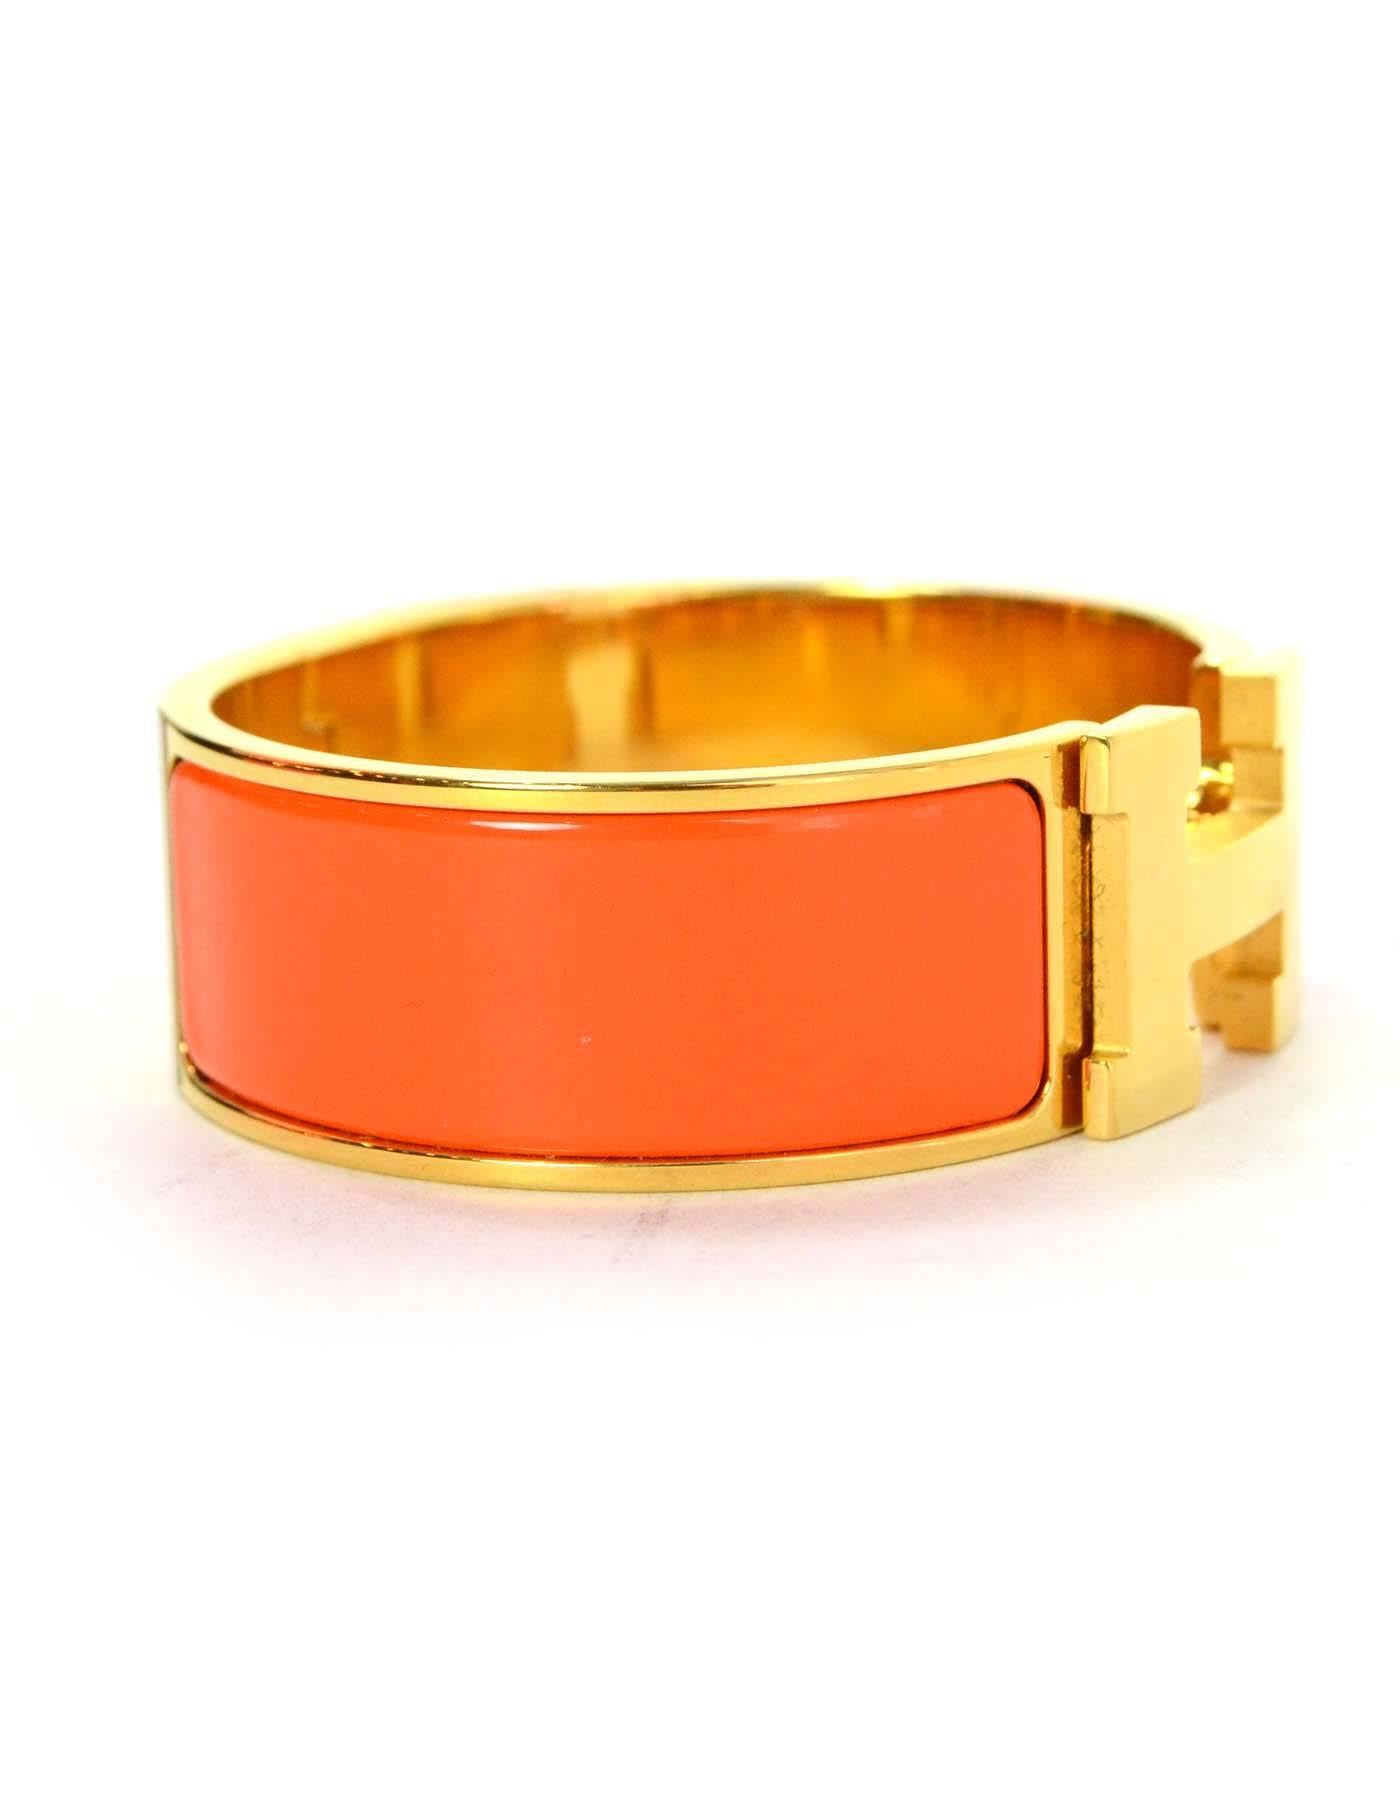 Hermes Orange Enamel Wide H Clic Clac PM Bracelet 
Made In: France
Color: Orange
Hardware: Goldtone
Materials: Enamel and metal
Closure: H swivels with hinge opening
Stamp: Hermes P Made in France
Overall Condition: Excellent pre-owned